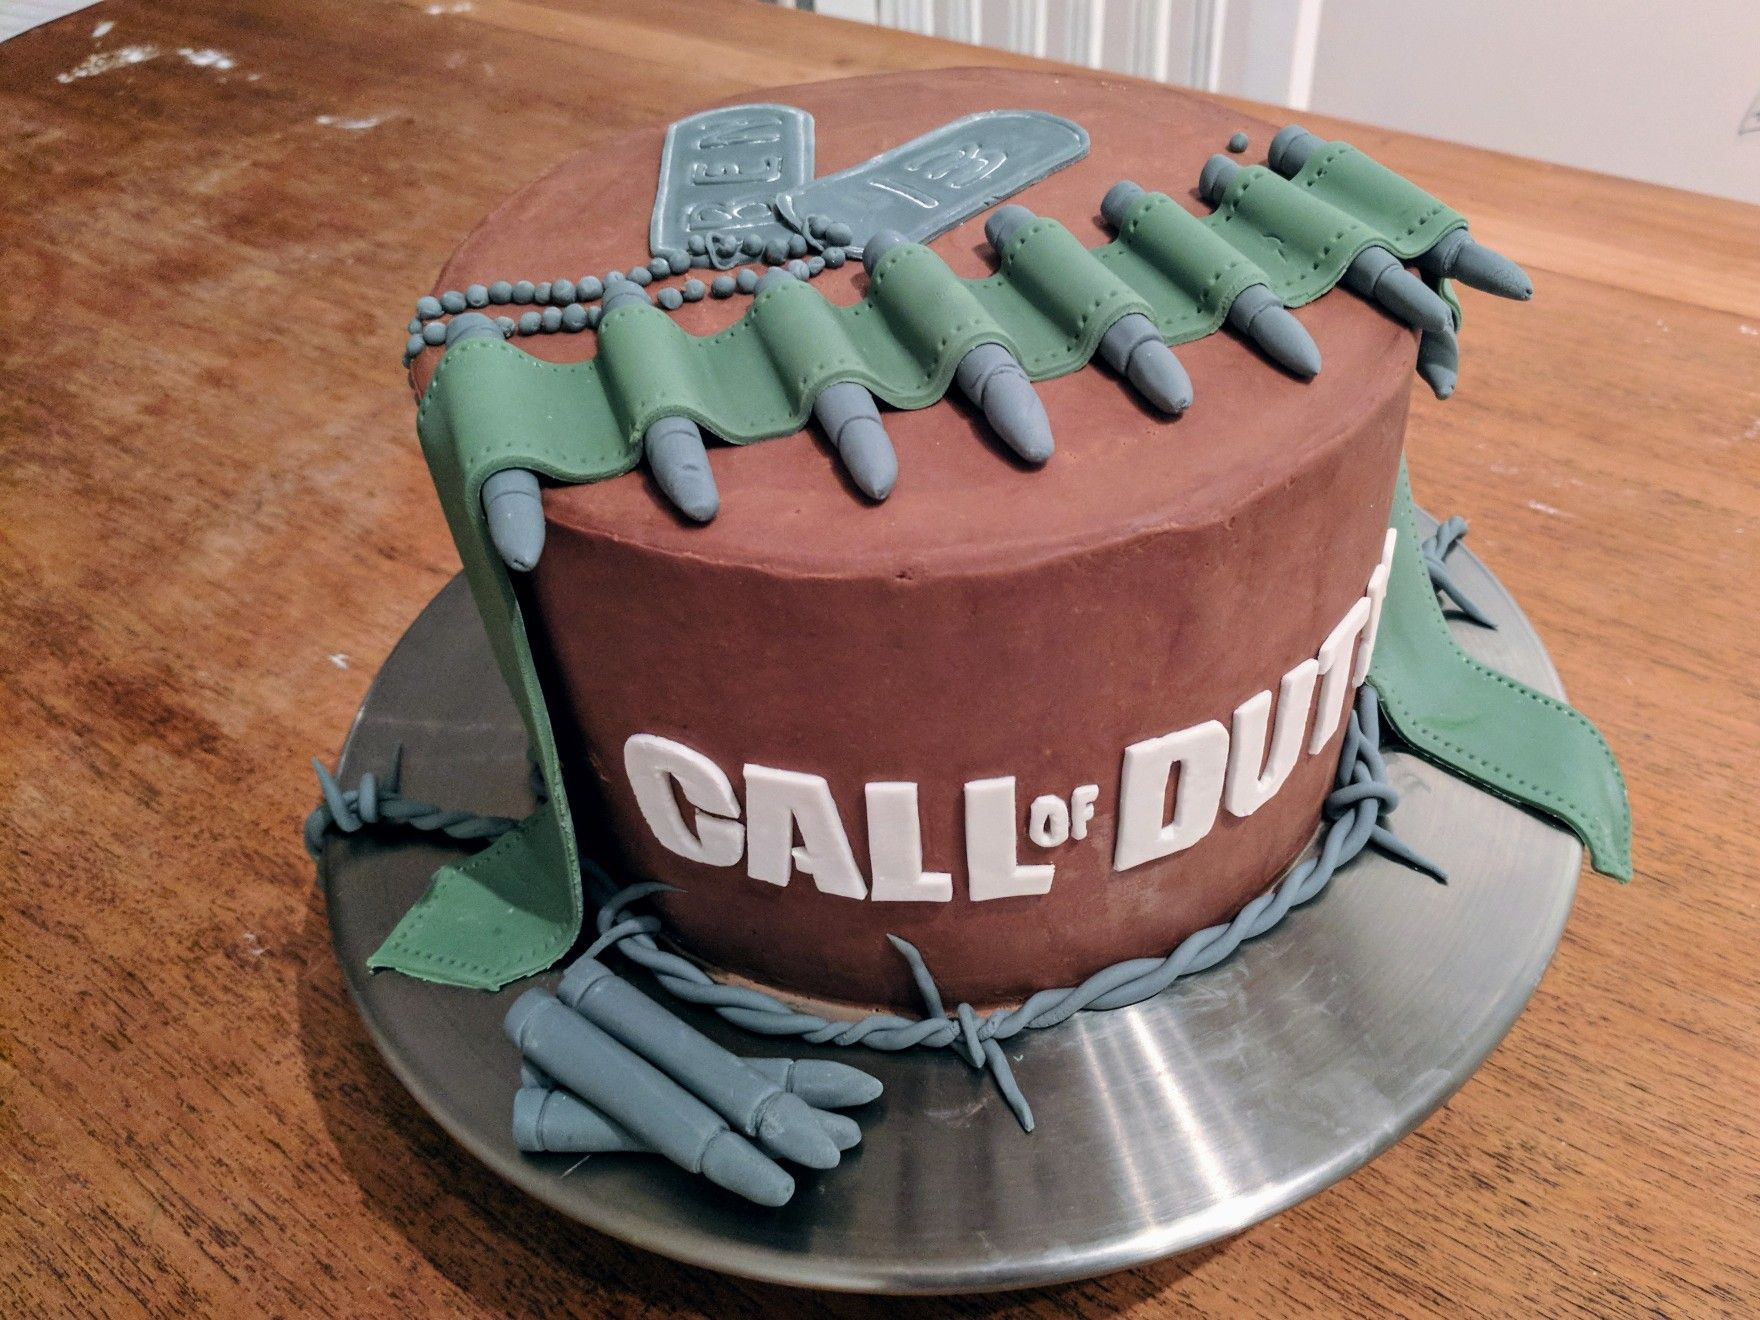 Call Of Duty Cake Recipe
 Call of duty cake for my 13 yr old